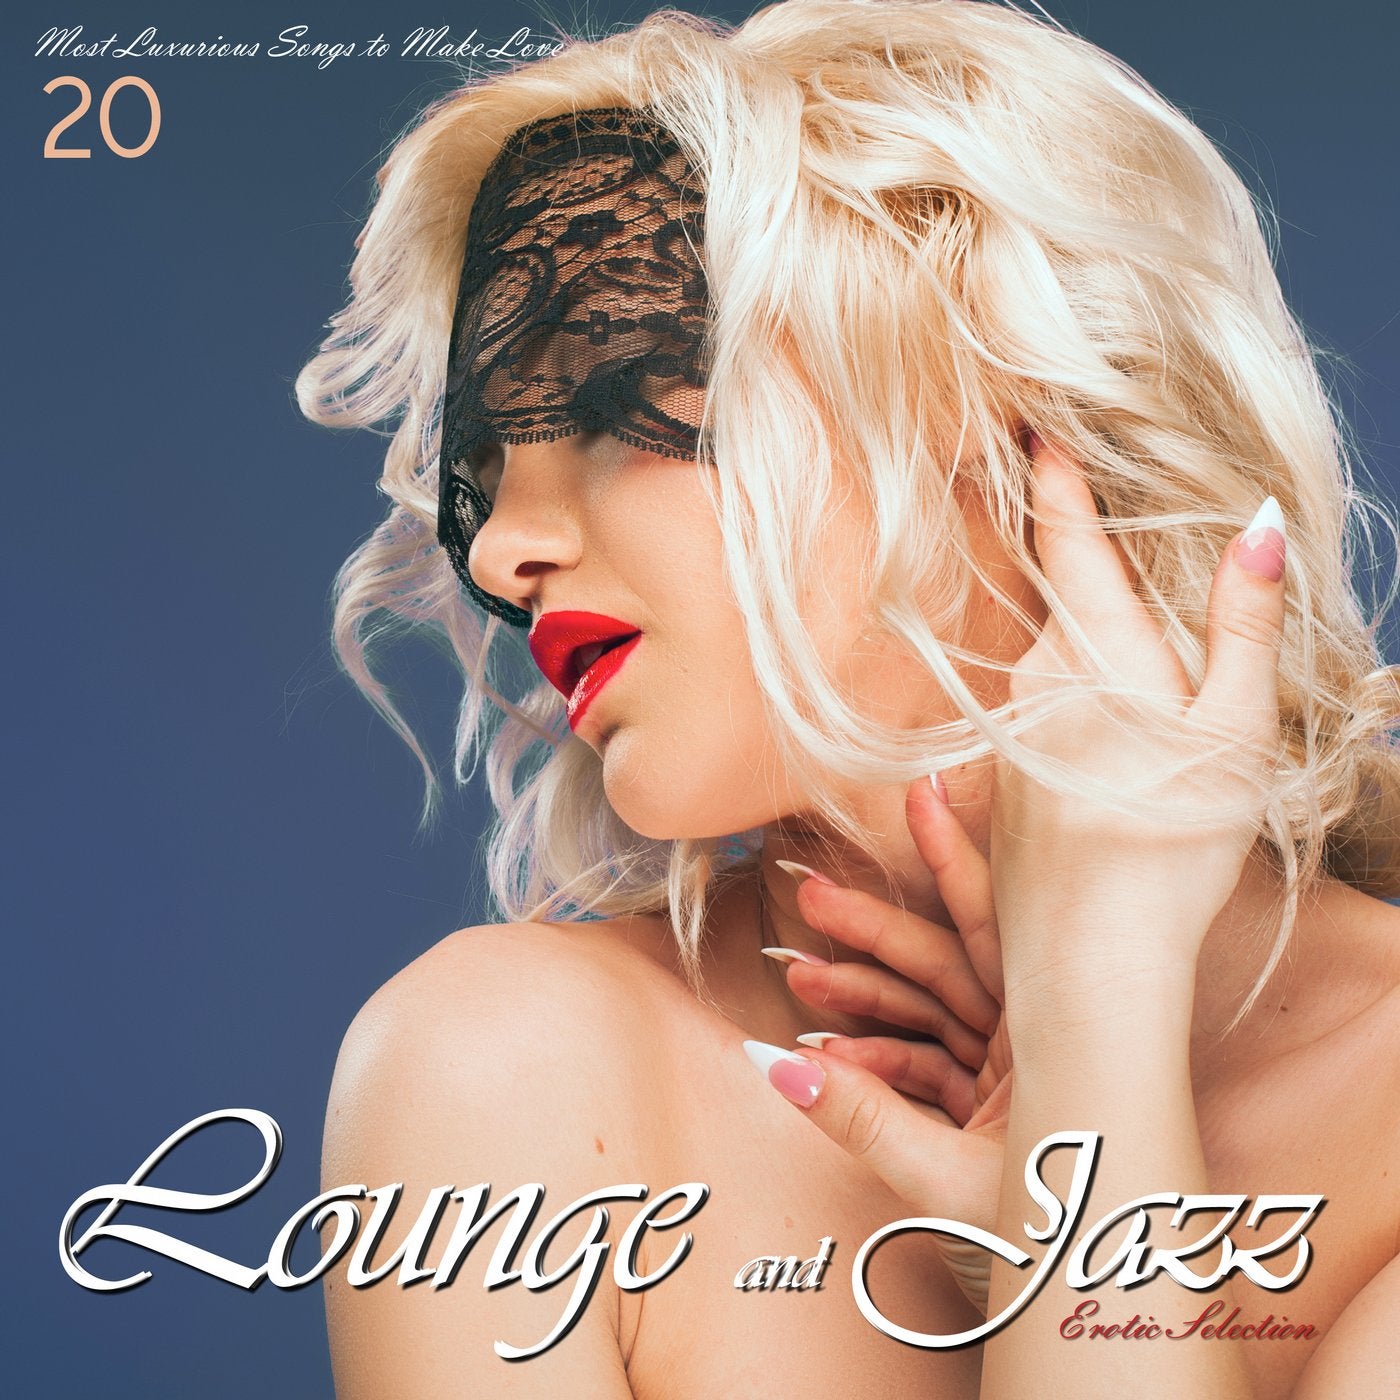 LOUNGE AND JAZZ EROTIC SELECTION 20 Most Luxurious Songs to Make Love